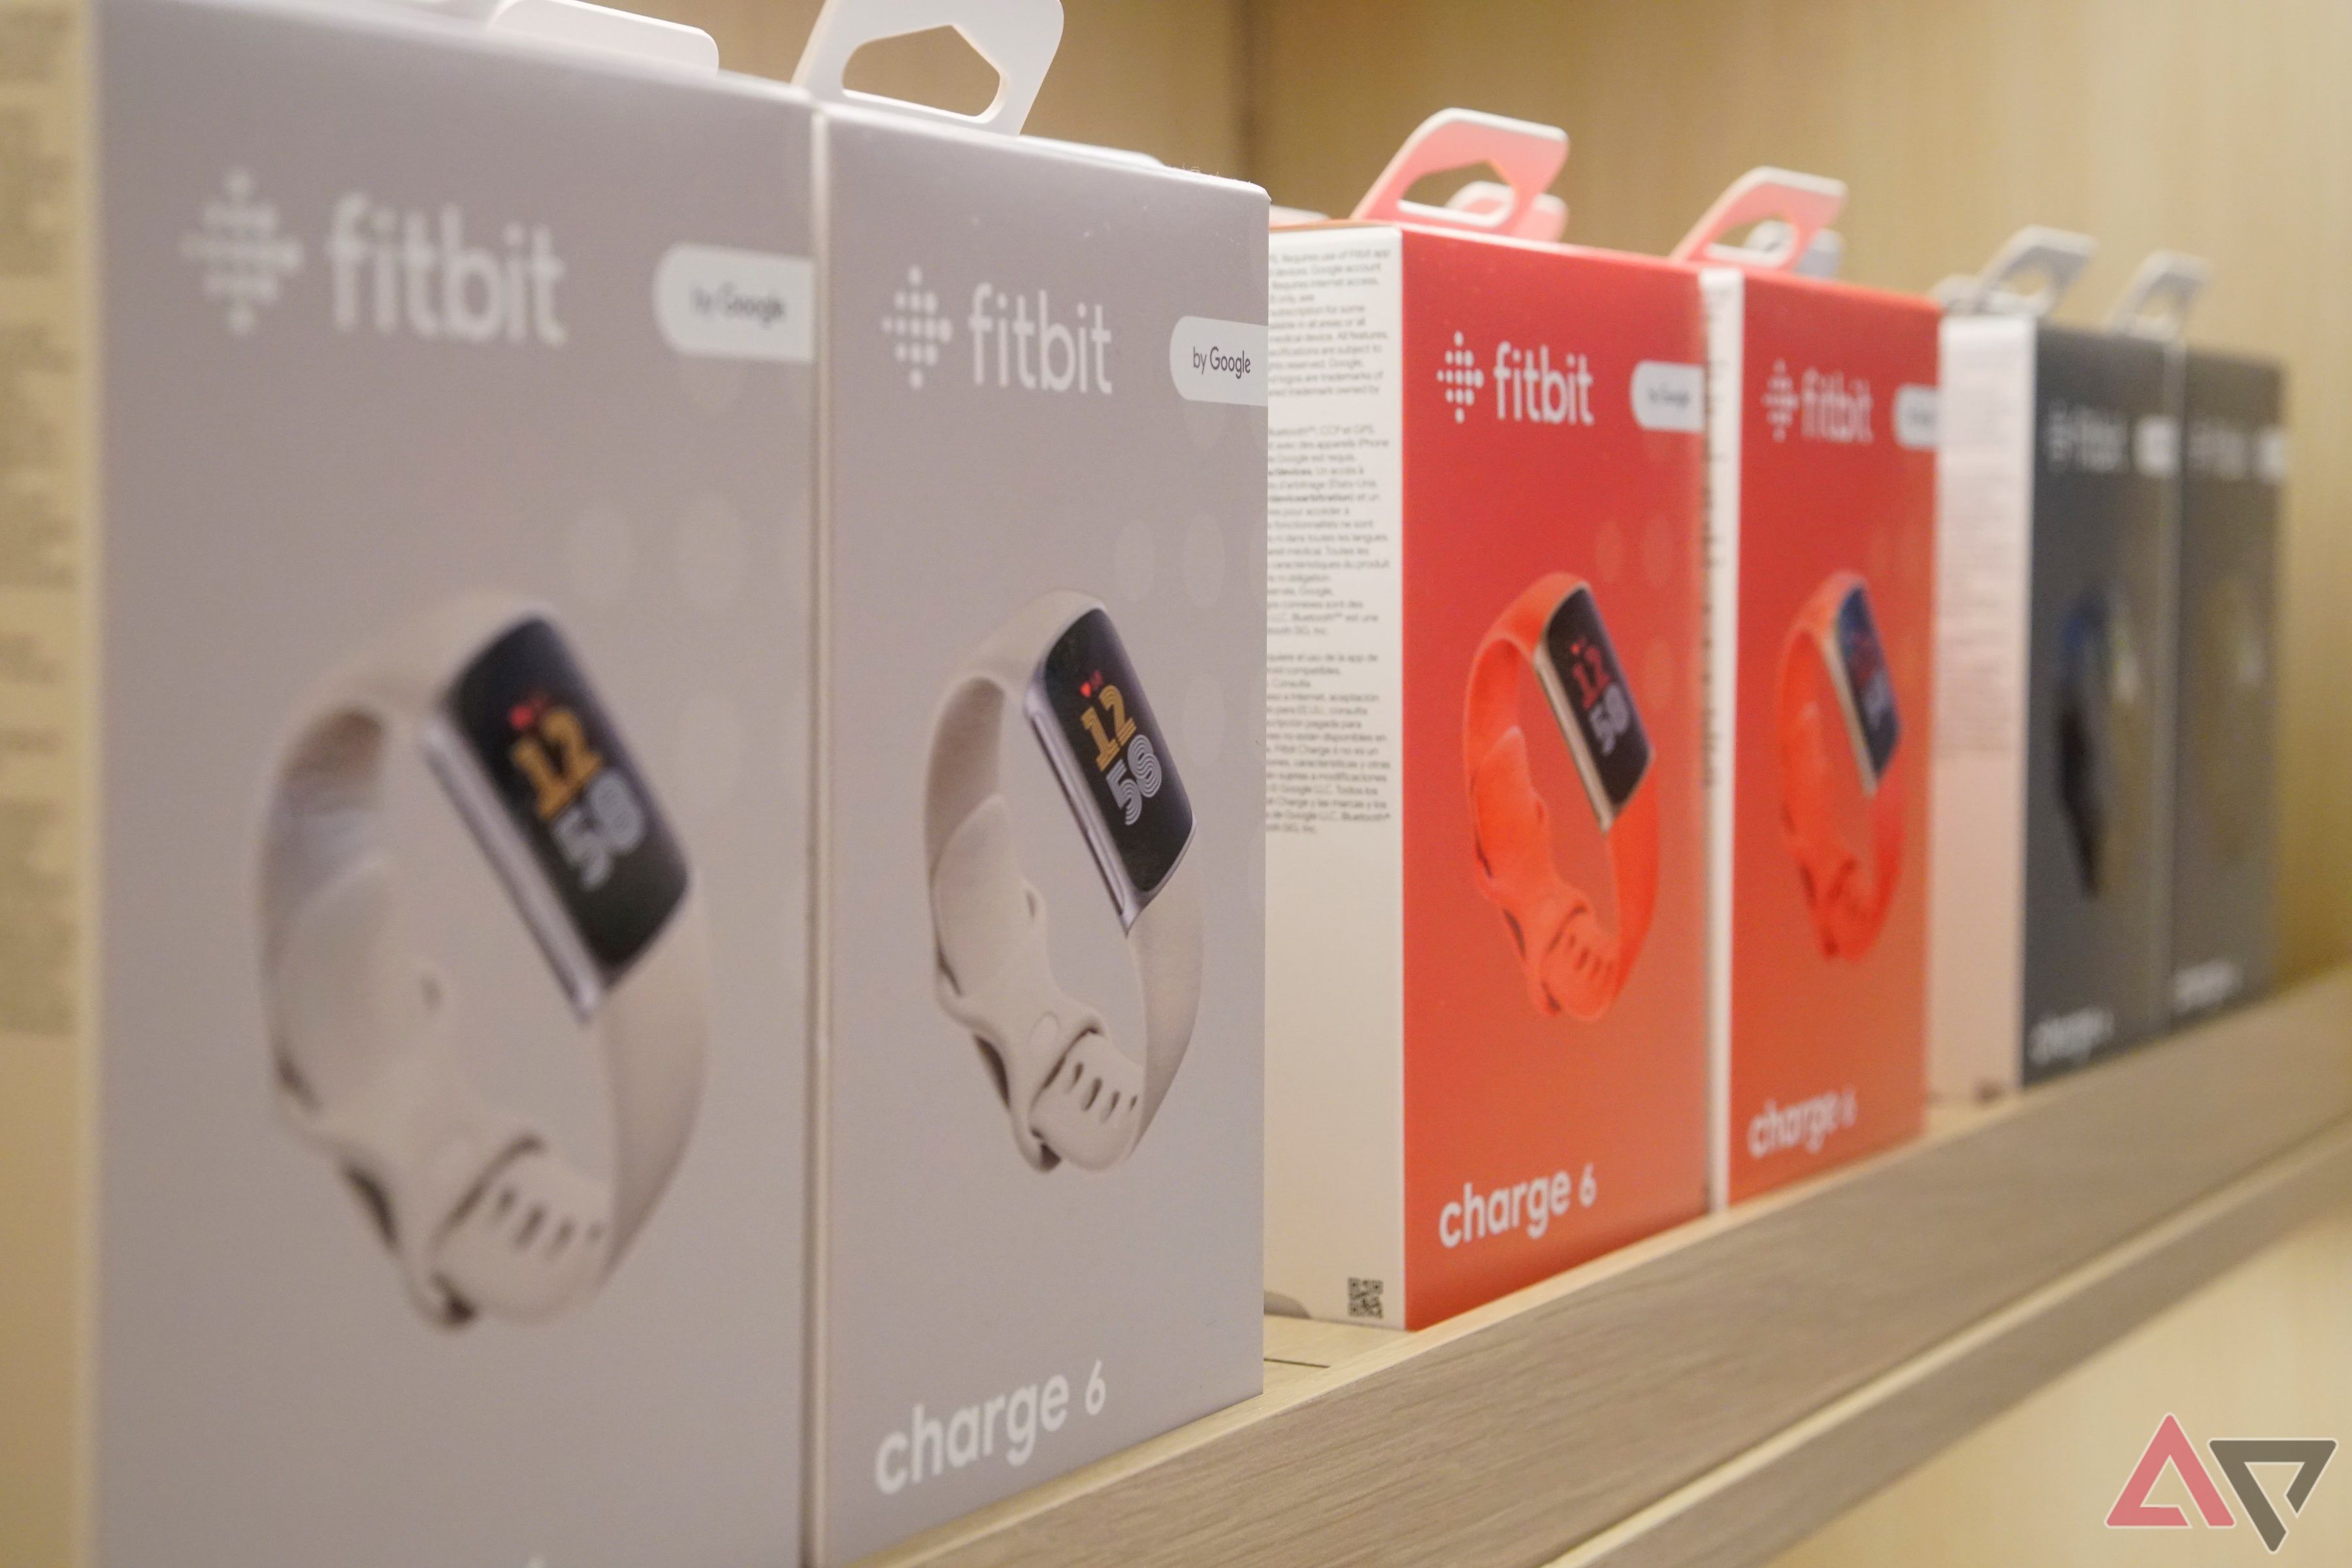 Boxes of Fitbit Charge 6 trackers at the Google Store in Boston.